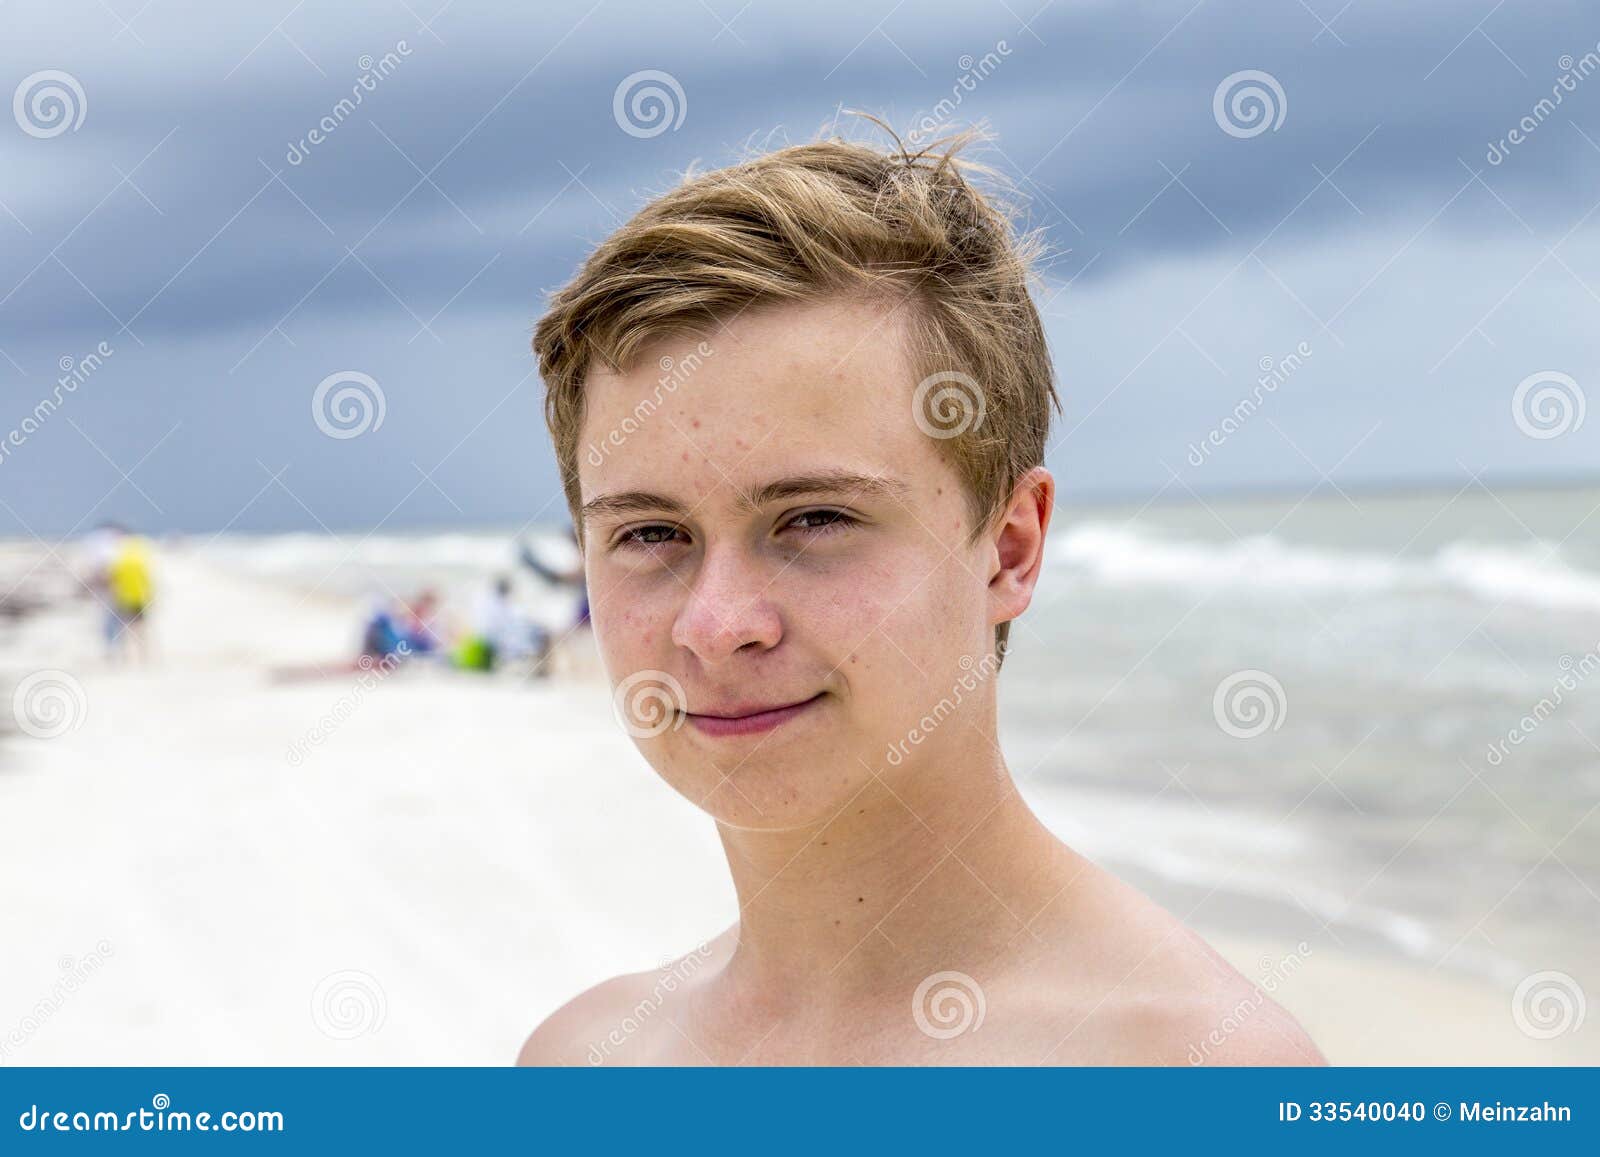 Young Happy Boy Looking Handsome at Stock Photo - Image of cheeky ...